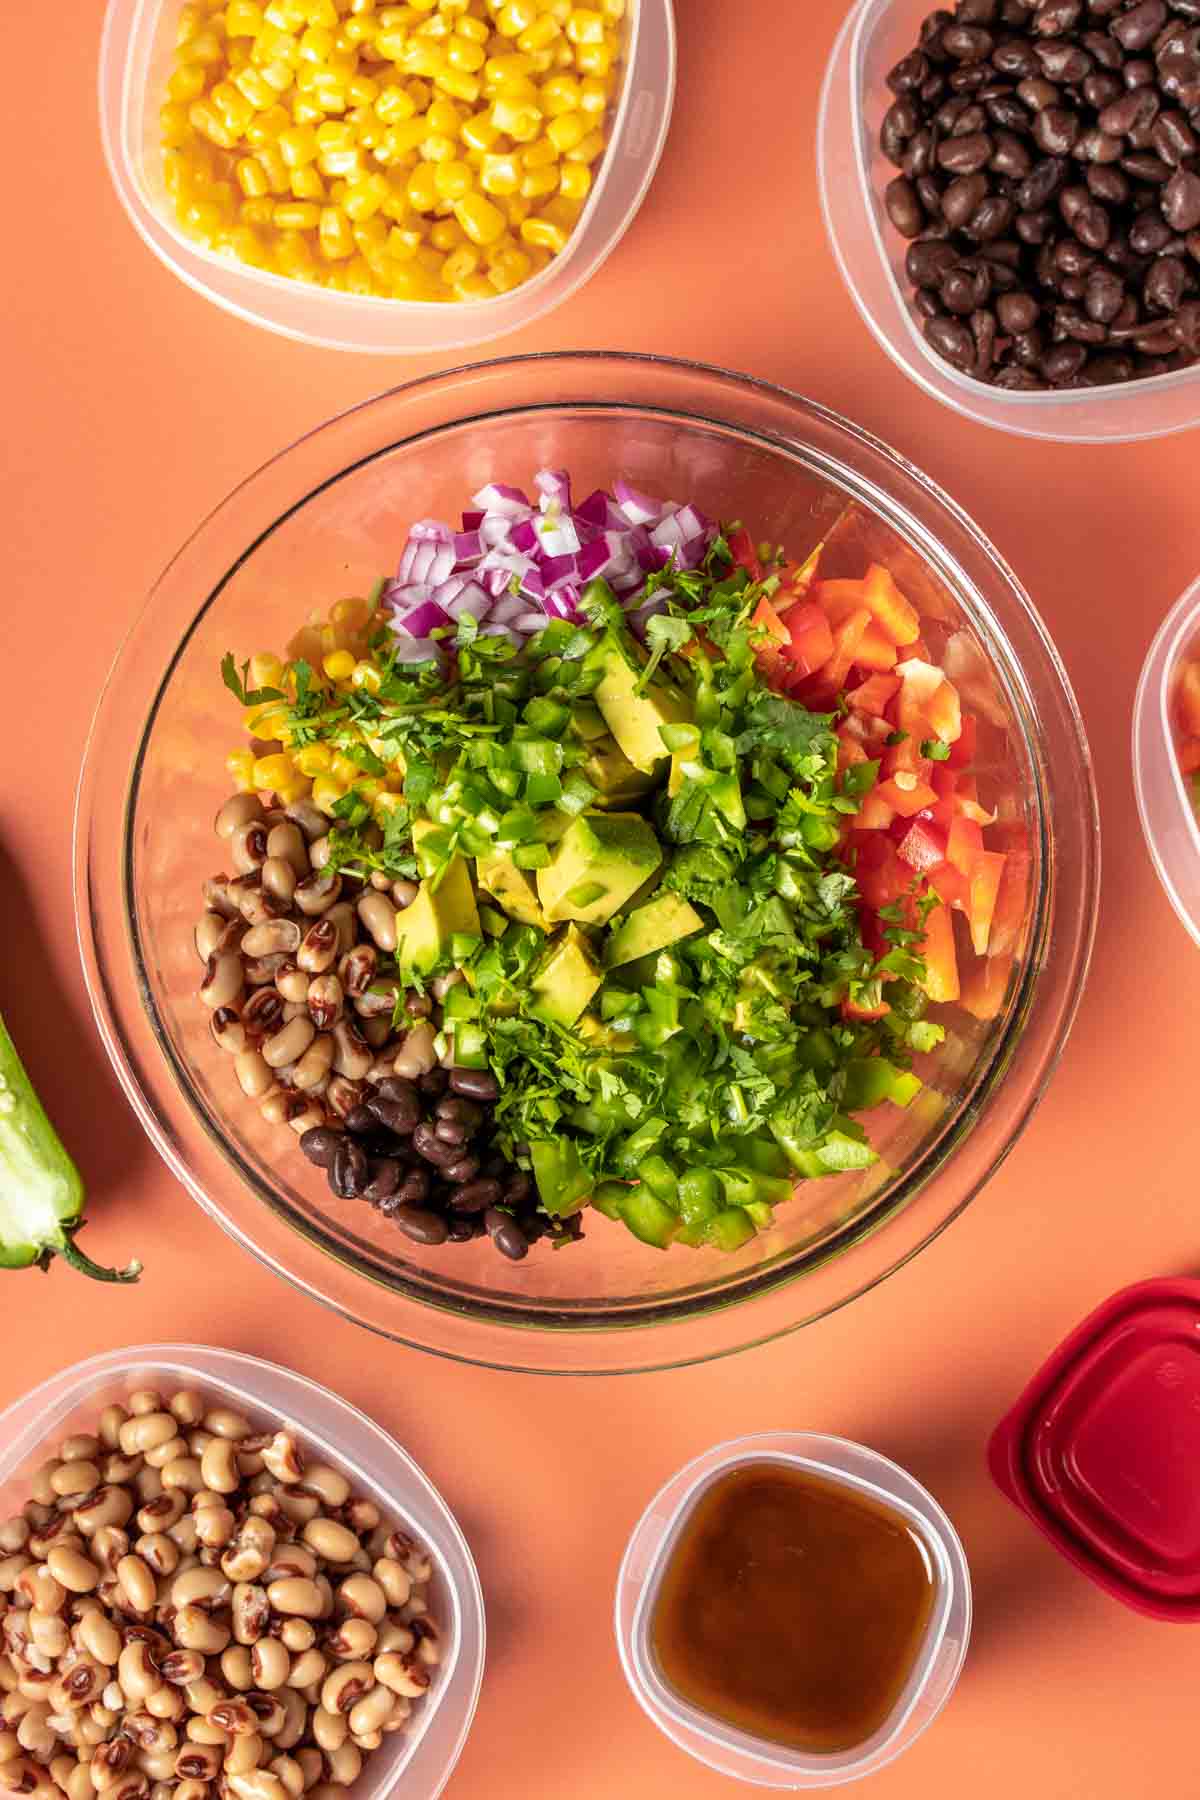 A glass bowl with ingredients to make cowboy caviar lined up surrounded by more ingredients in bowls on an orange background.